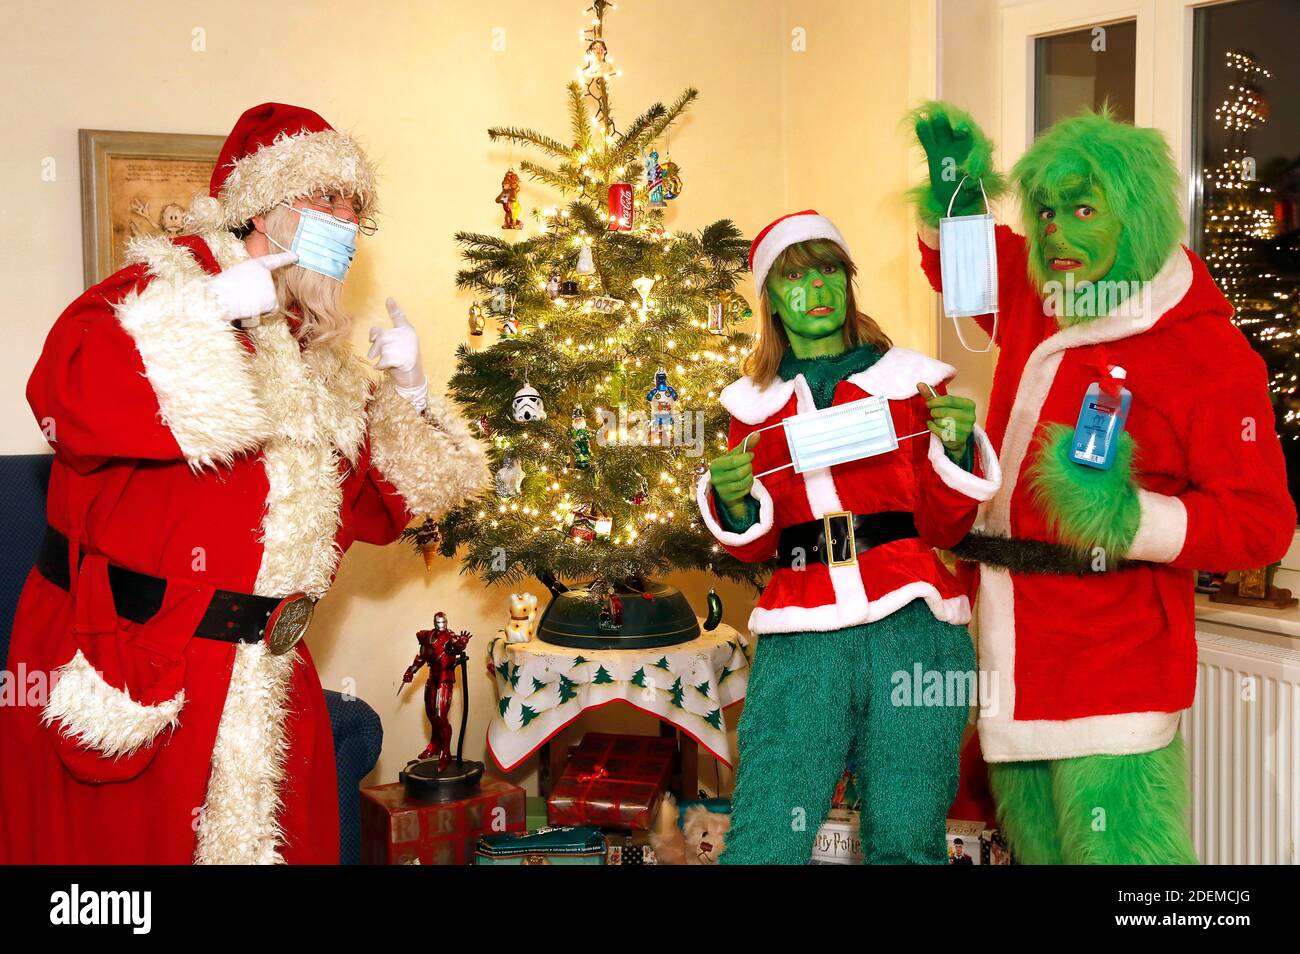 Santa Claus tries to explain to the Grinch and Mrs. Grinch how to wear a protective mask. GEEK ART - Bodypainting and Transformaking: 'The Grinch steals Christmas' photoshooting with Enrico Lein as Grinch, Maria Skupin as Mrs. Grinch and Fabian Zesiger as Santa Claus at the Villa Czarnecki. in Hameln on November 30, 2020 - A project by the photographer Tschiponnique Skupin and the bodypainter Enrico Lein Stock Photo